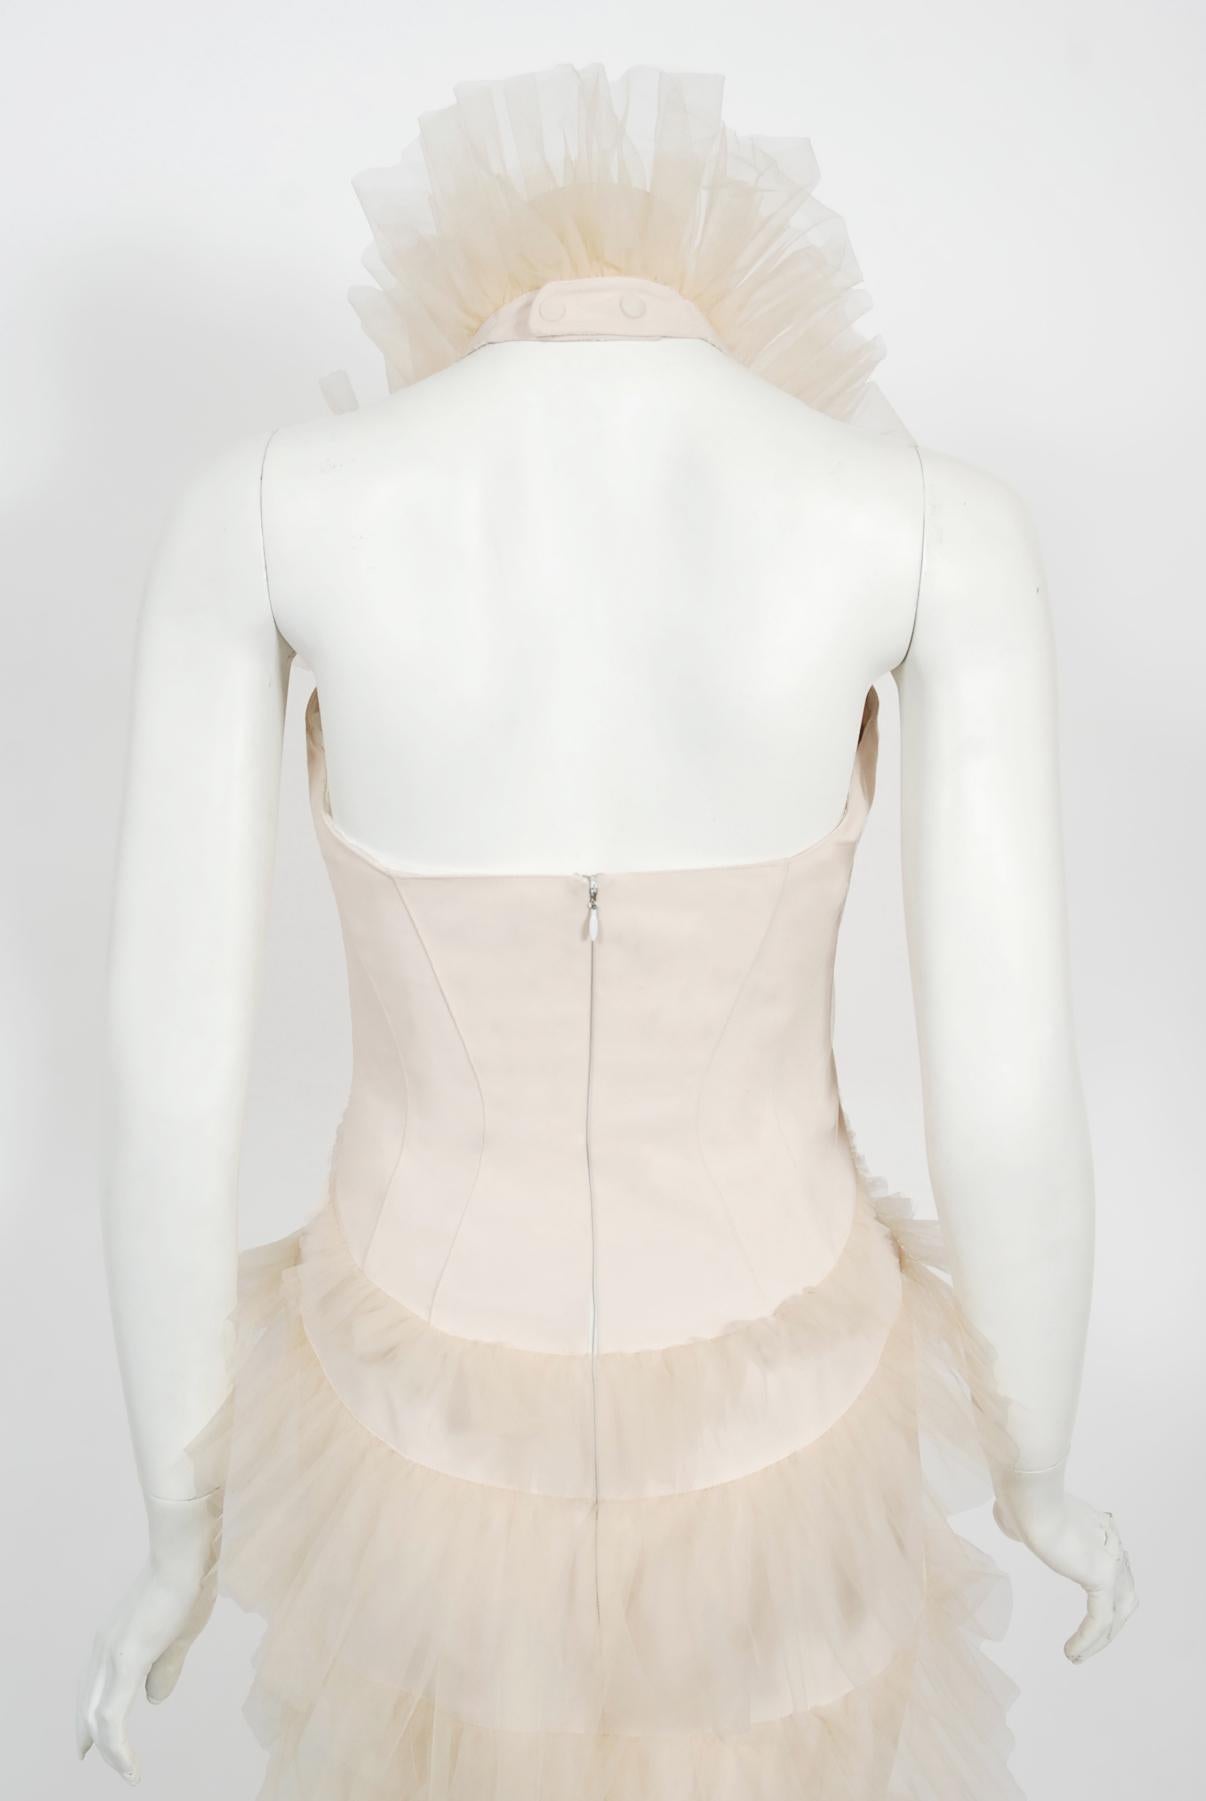 Vintage 1992 Thierry Mugler Couture Stretch Silk & Tulle Bustier Hourglass Gown  For Sale 9